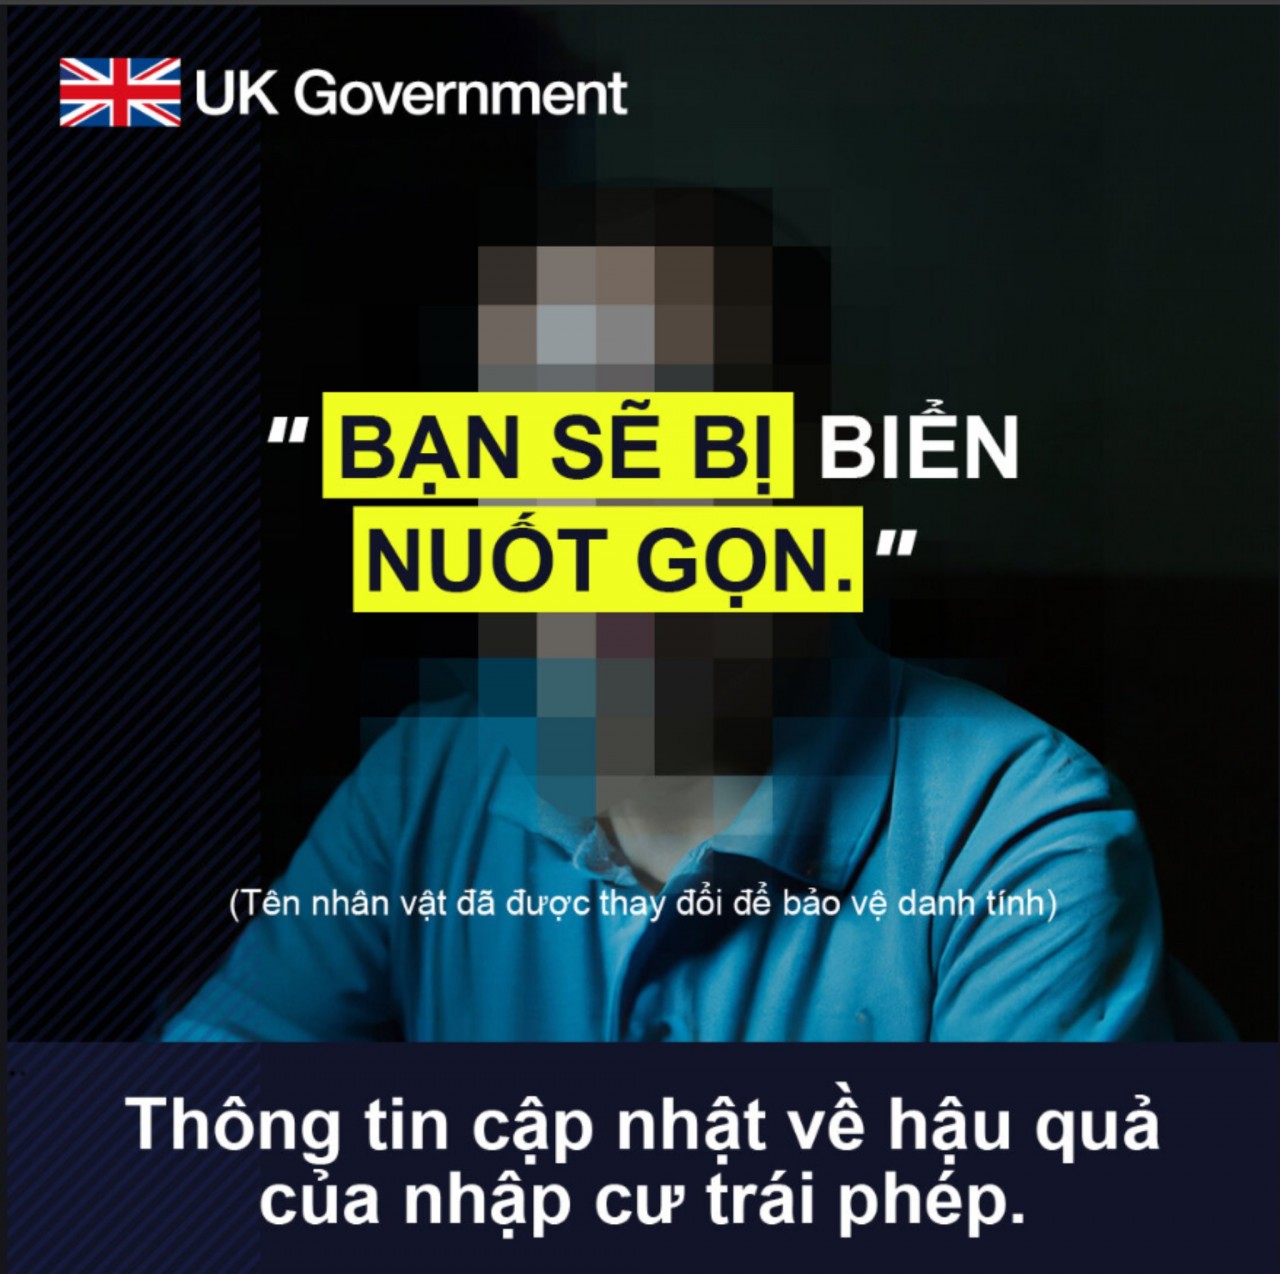 Home Office expands int'l social media campaign to warn migrants of entering UK illegally